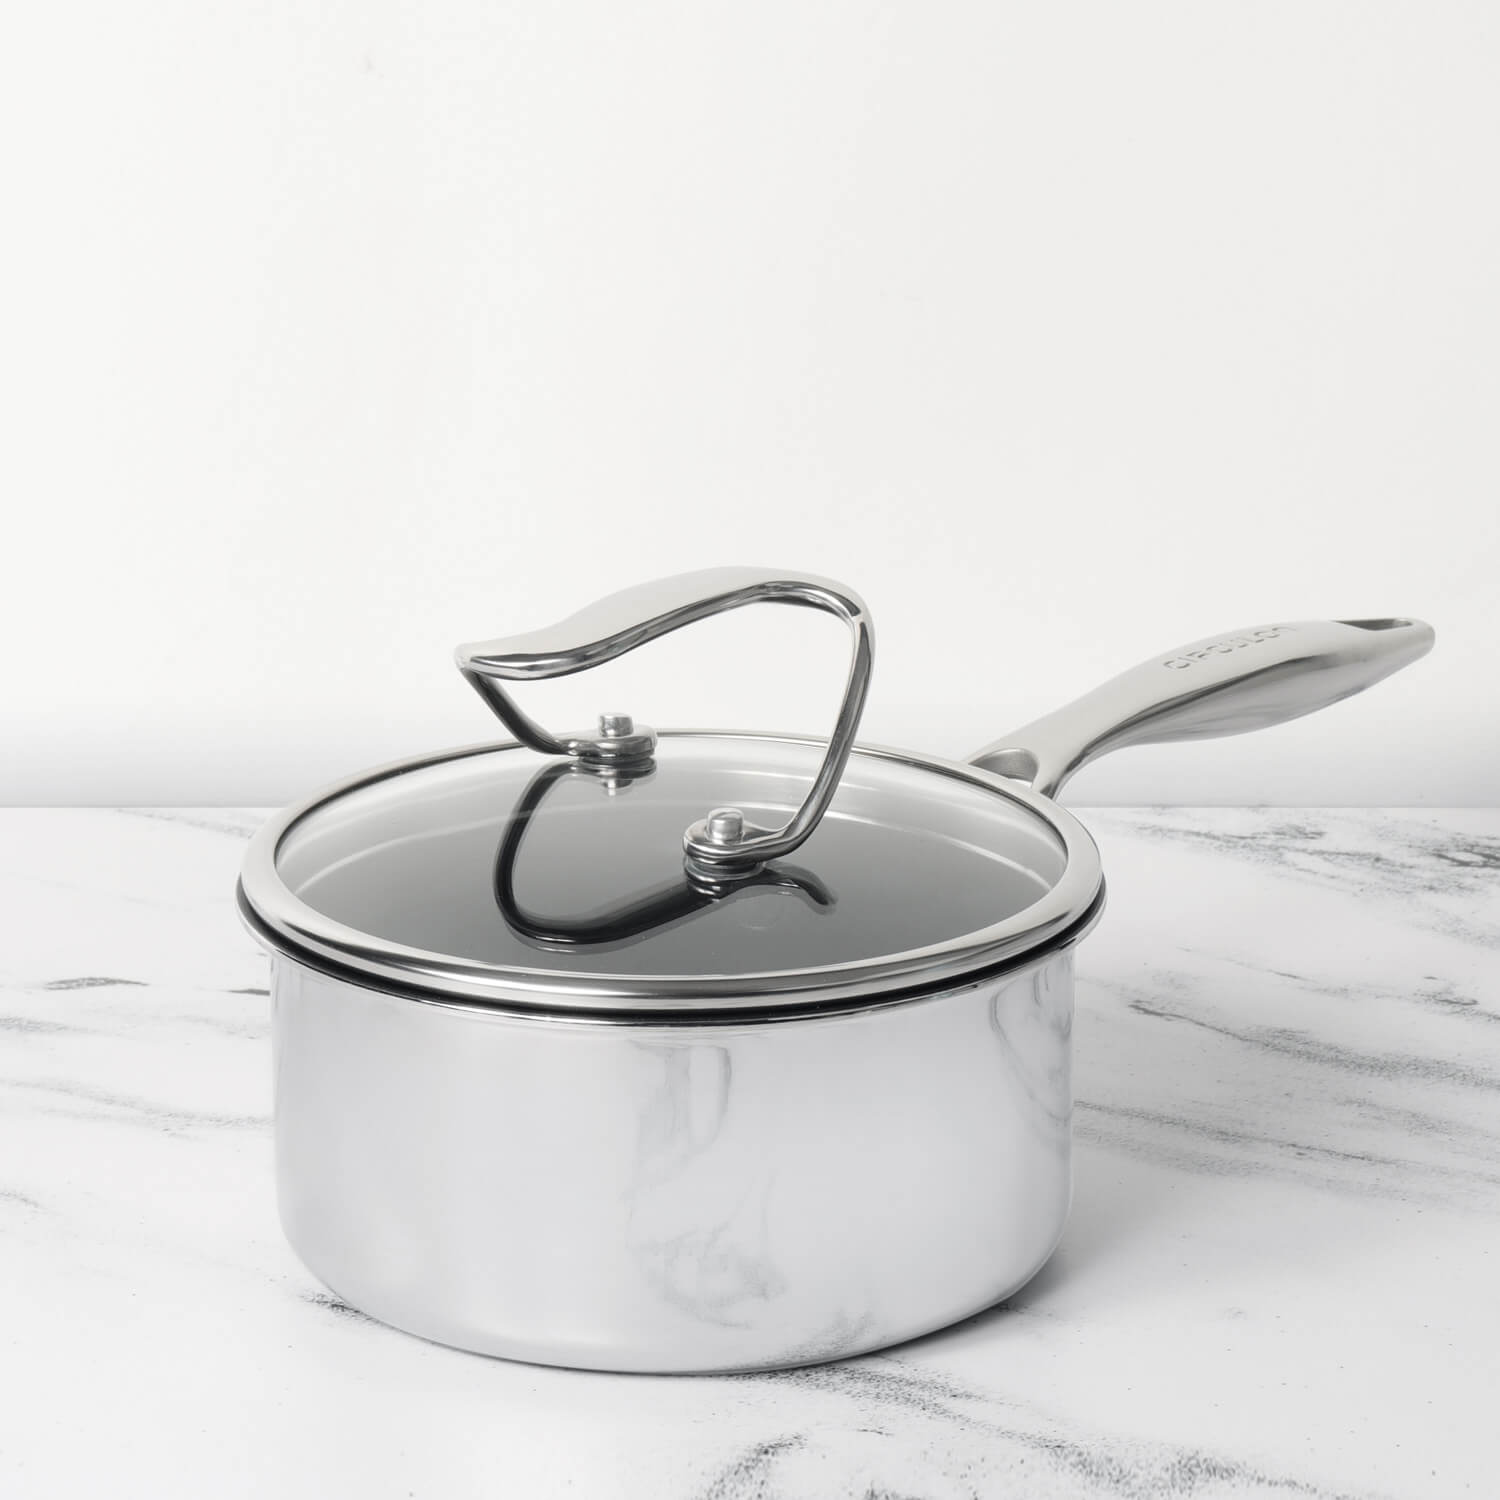 Circulon Clad Stainless Steel Saucepan with Glass Lid and Hybrid SteelShield and Nonstick Technology, 16cm, Silver